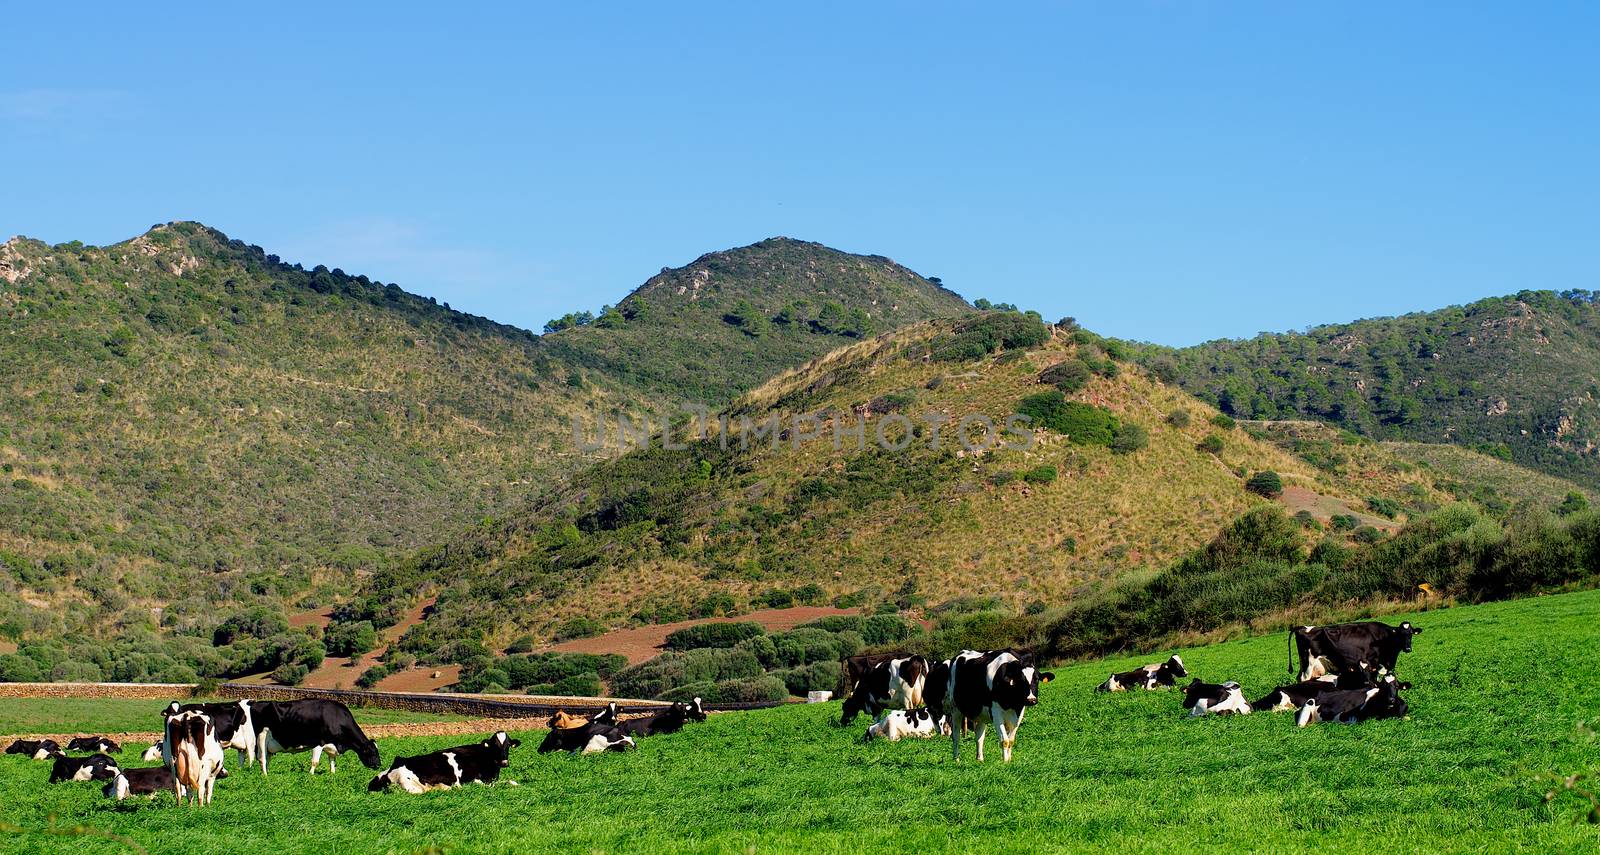 Large Herd of Funny Spotted Black and White Cows on Green Pasture Meadow Outdoors